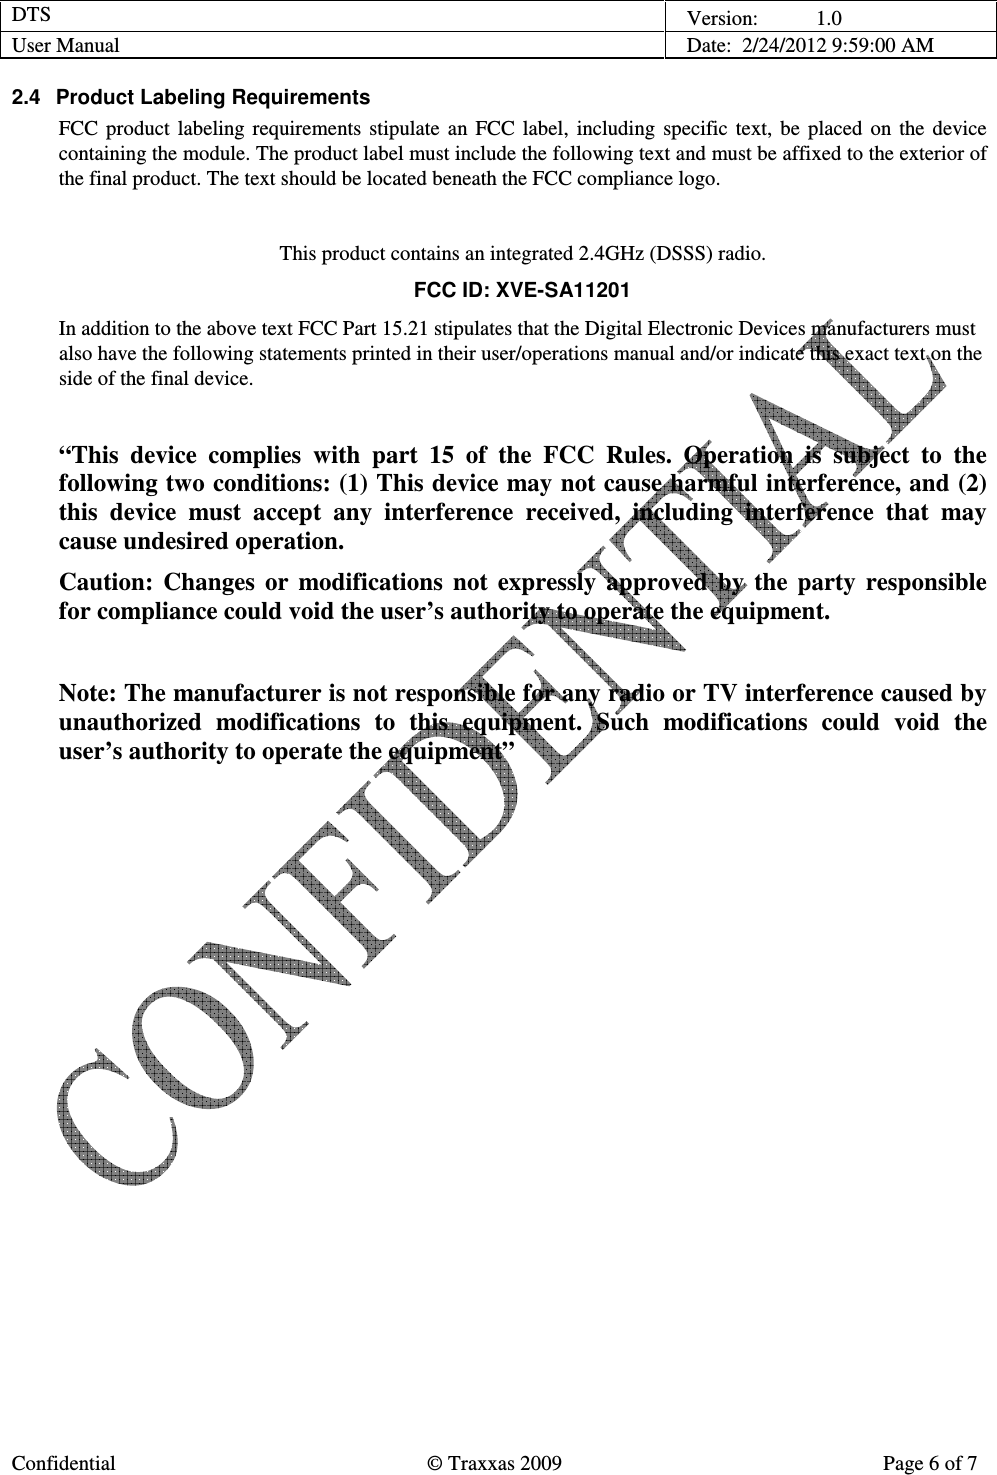 DTS    Version:           1.0 User Manual    Date:  2/24/2012 9:59:00 AM  Confidential  © Traxxas 2009  Page 6 of 7  2.4  Product Labeling Requirements FCC  product  labeling  requirements  stipulate  an  FCC  label,  including  specific  text,  be  placed  on  the  device containing the module. The product label must include the following text and must be affixed to the exterior of the final product. The text should be located beneath the FCC compliance logo.  This product contains an integrated 2.4GHz (DSSS) radio. FCC ID: XVE-SA11201 In addition to the above text FCC Part 15.21 stipulates that the Digital Electronic Devices manufacturers must also have the following statements printed in their user/operations manual and/or indicate this exact text on the side of the final device.  “This  device  complies  with  part  15  of  the  FCC  Rules.  Operation  is  subject  to  the following two conditions: (1) This device may not cause harmful interference, and (2) this  device  must  accept  any  interference  received,  including  interference  that  may cause undesired operation. Caution:  Changes  or  modifications  not  expressly  approved  by  the  party  responsible for compliance could void the user’s authority to operate the equipment.  Note: The manufacturer is not responsible for any radio or TV interference caused by unauthorized  modifications  to  this  equipment.  Such  modifications  could  void  the user’s authority to operate the equipment”  